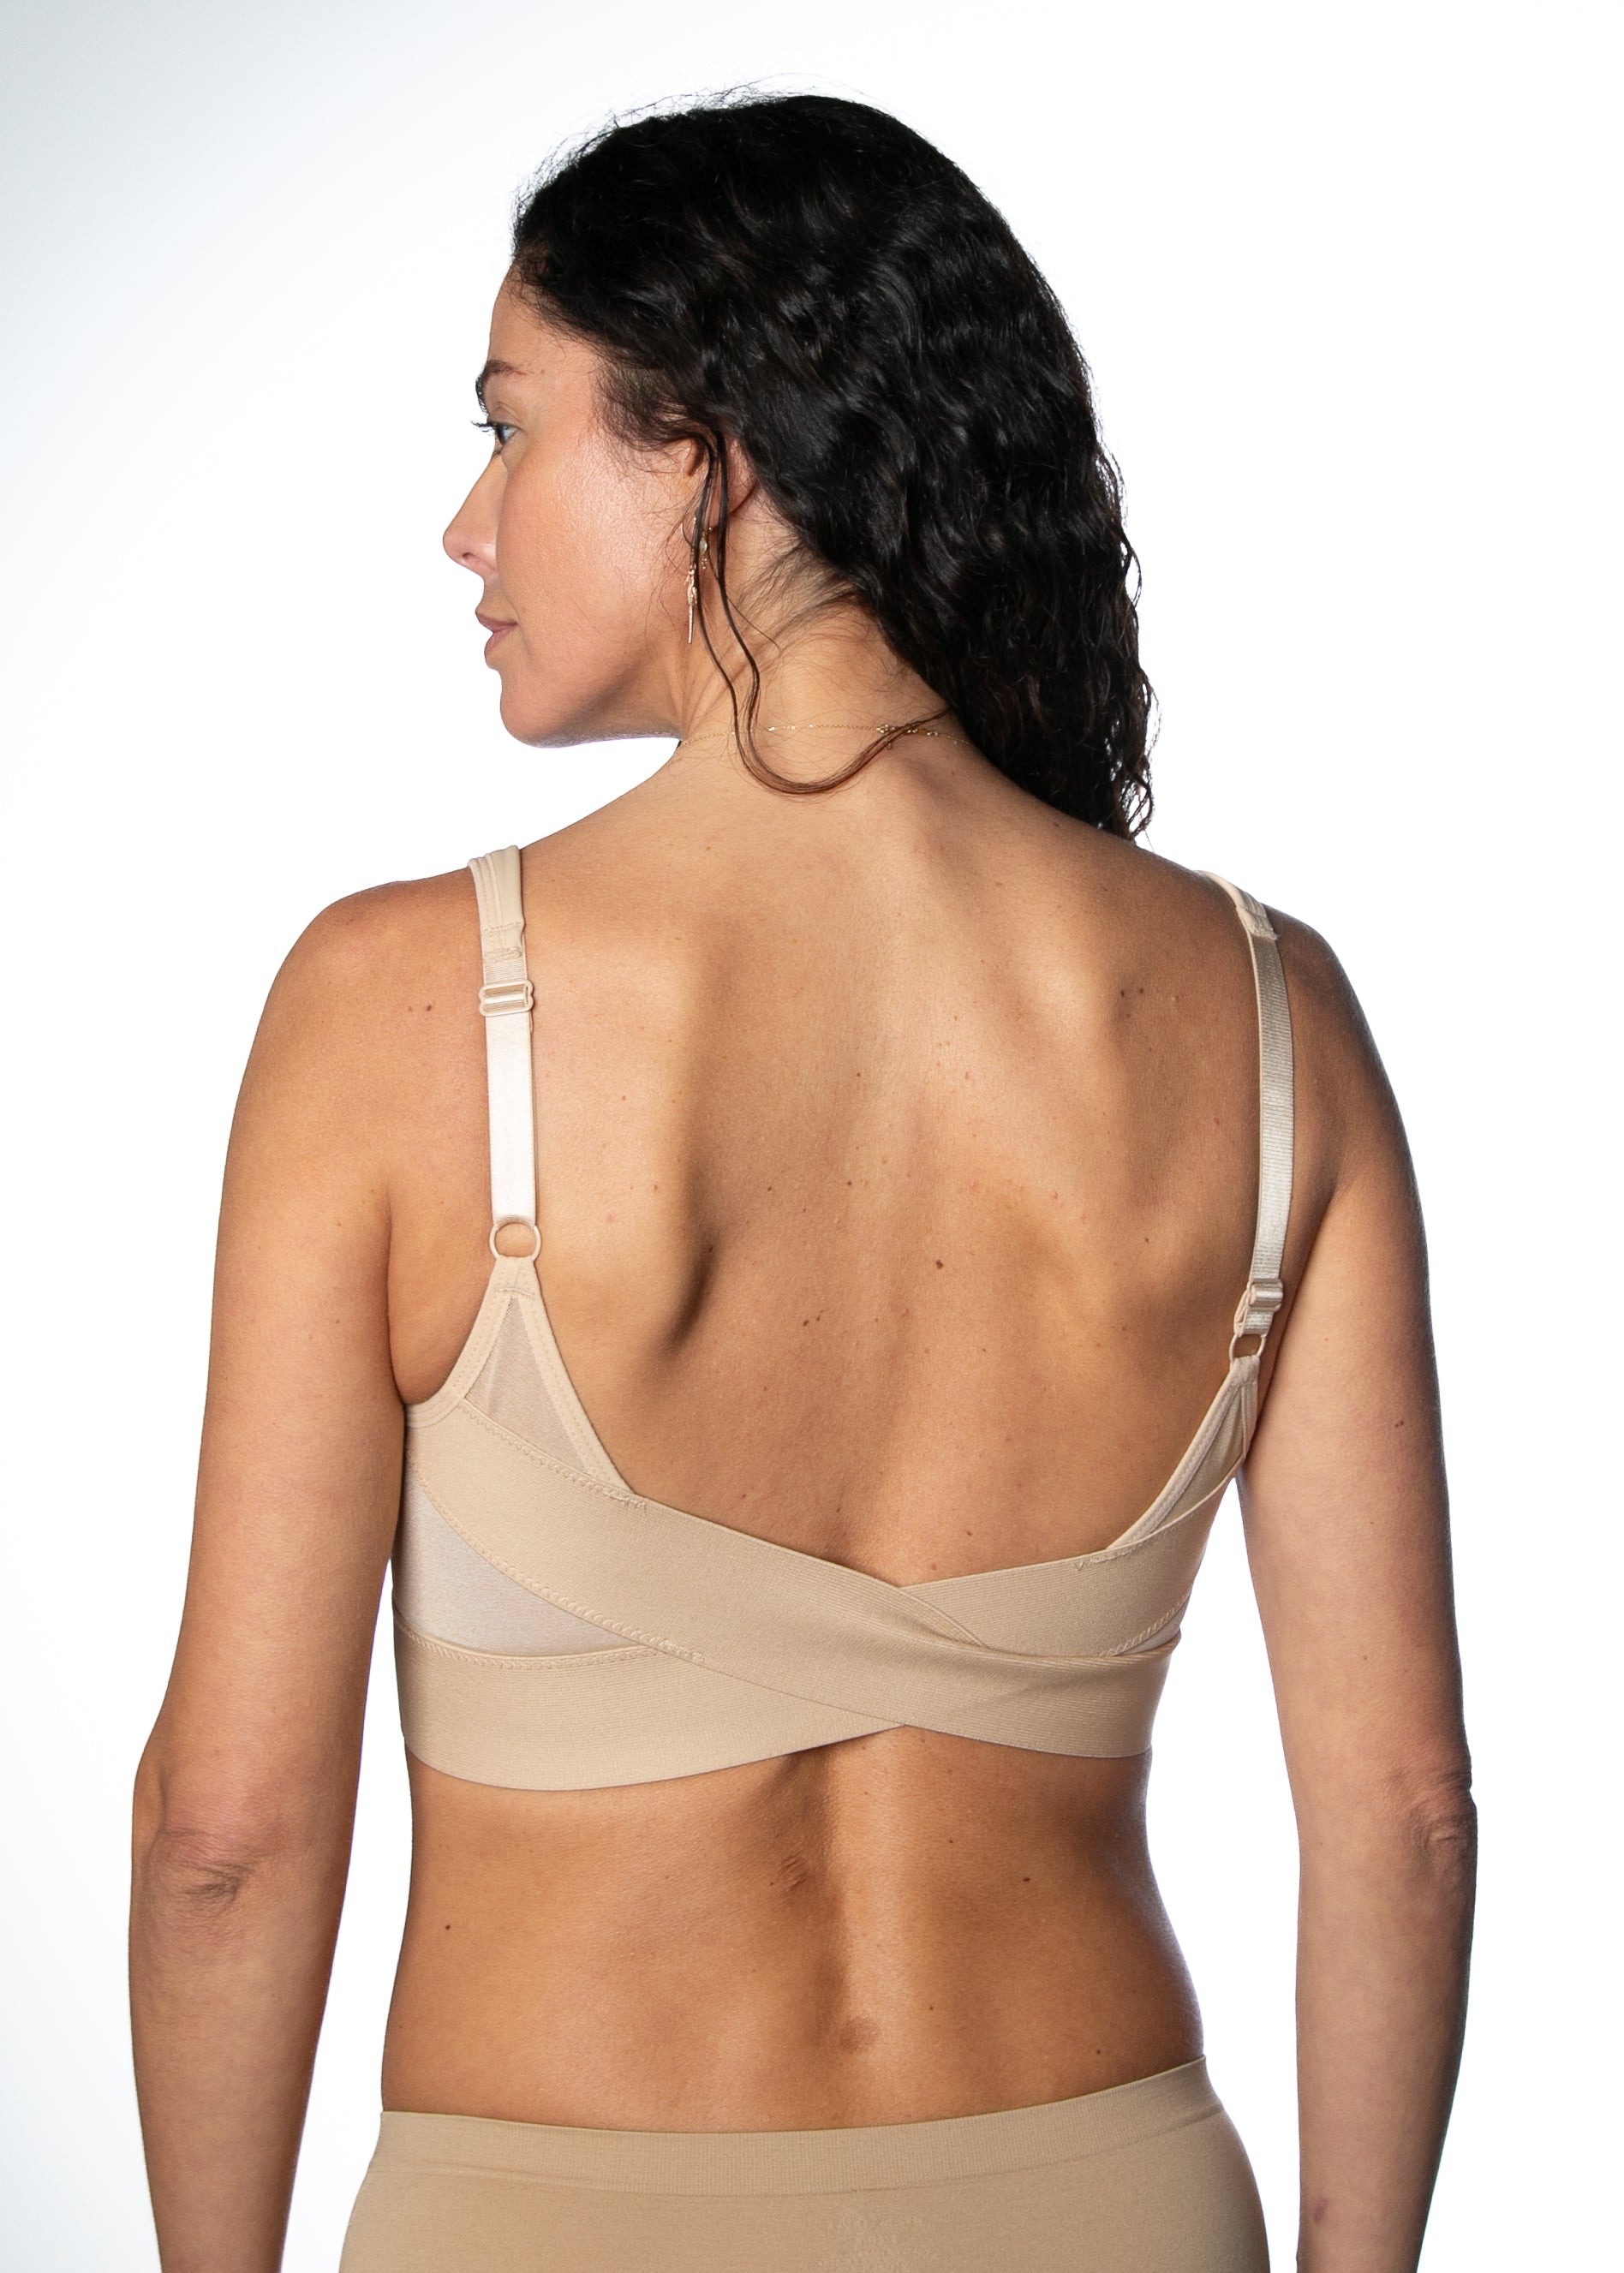 Rhonda Shear 2-pack Molded Cup Bra with Lace Back - 21045138